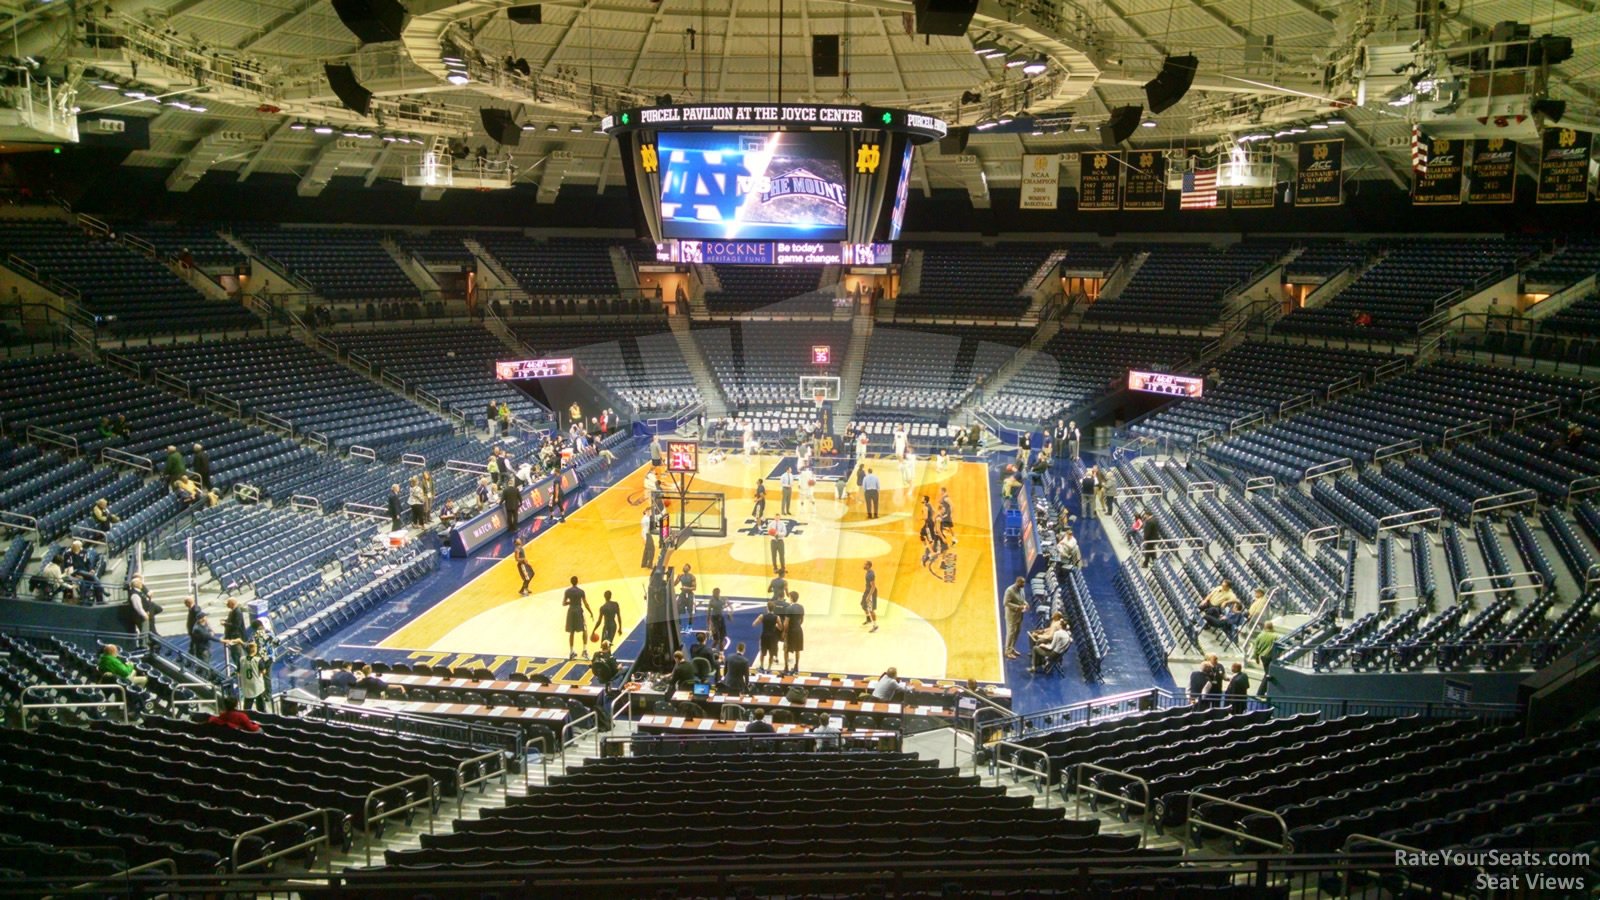 section 114, row 10 seat view  - joyce center